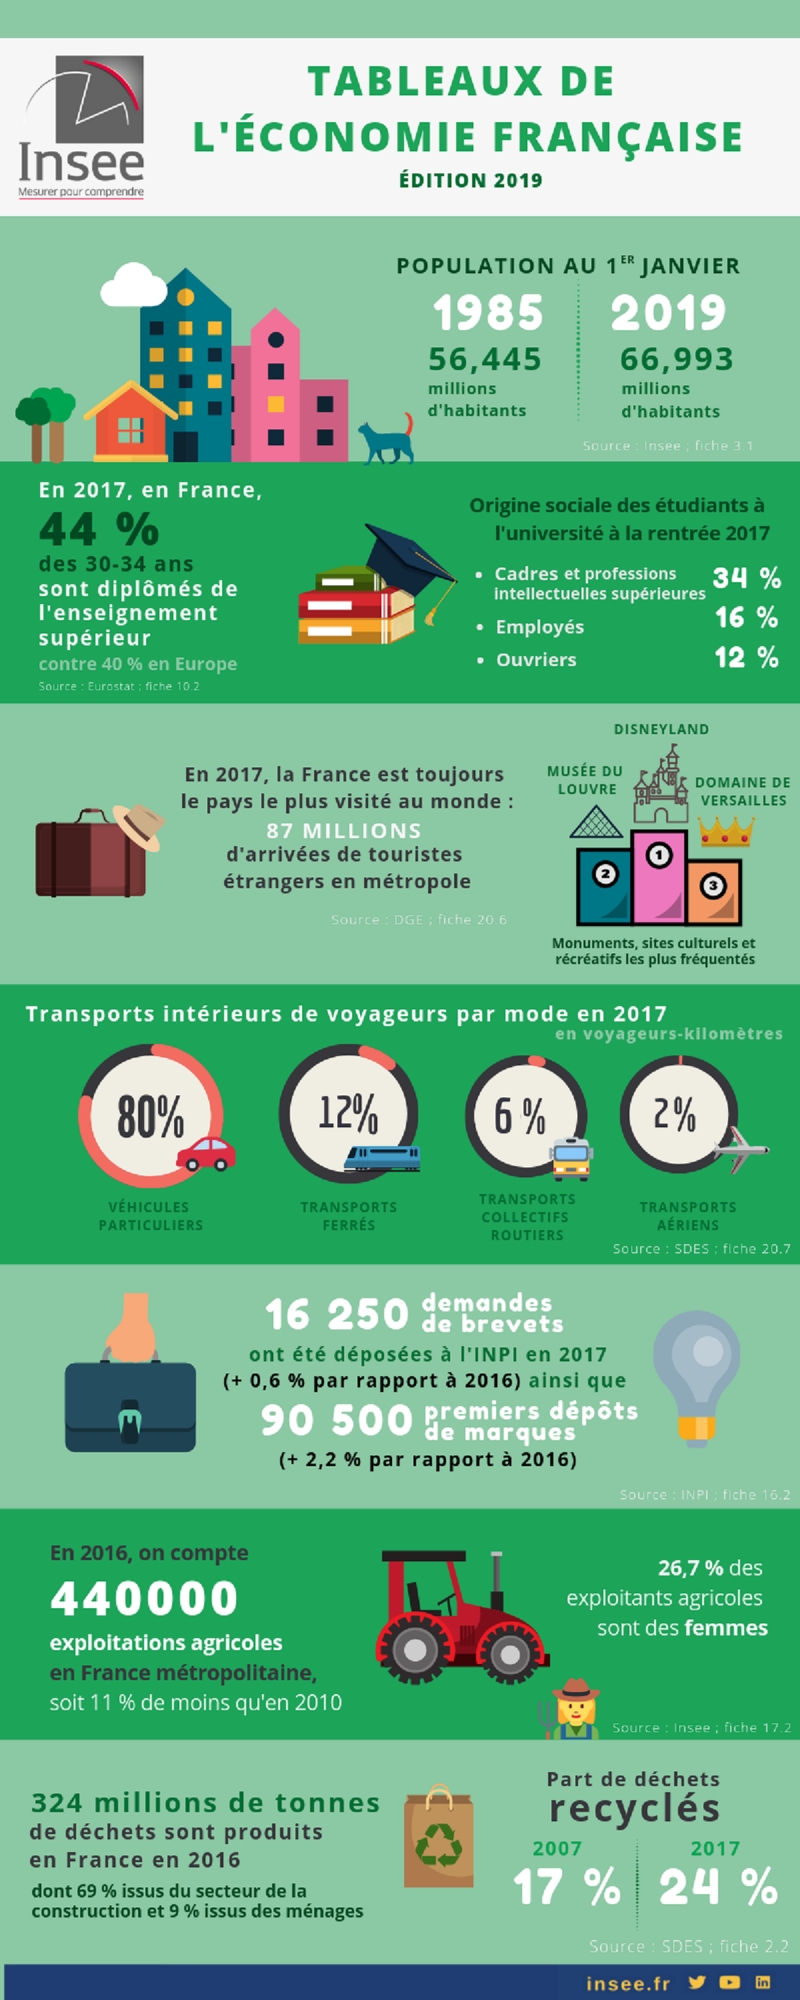 Cartographie-economie-francaise 2019-insee